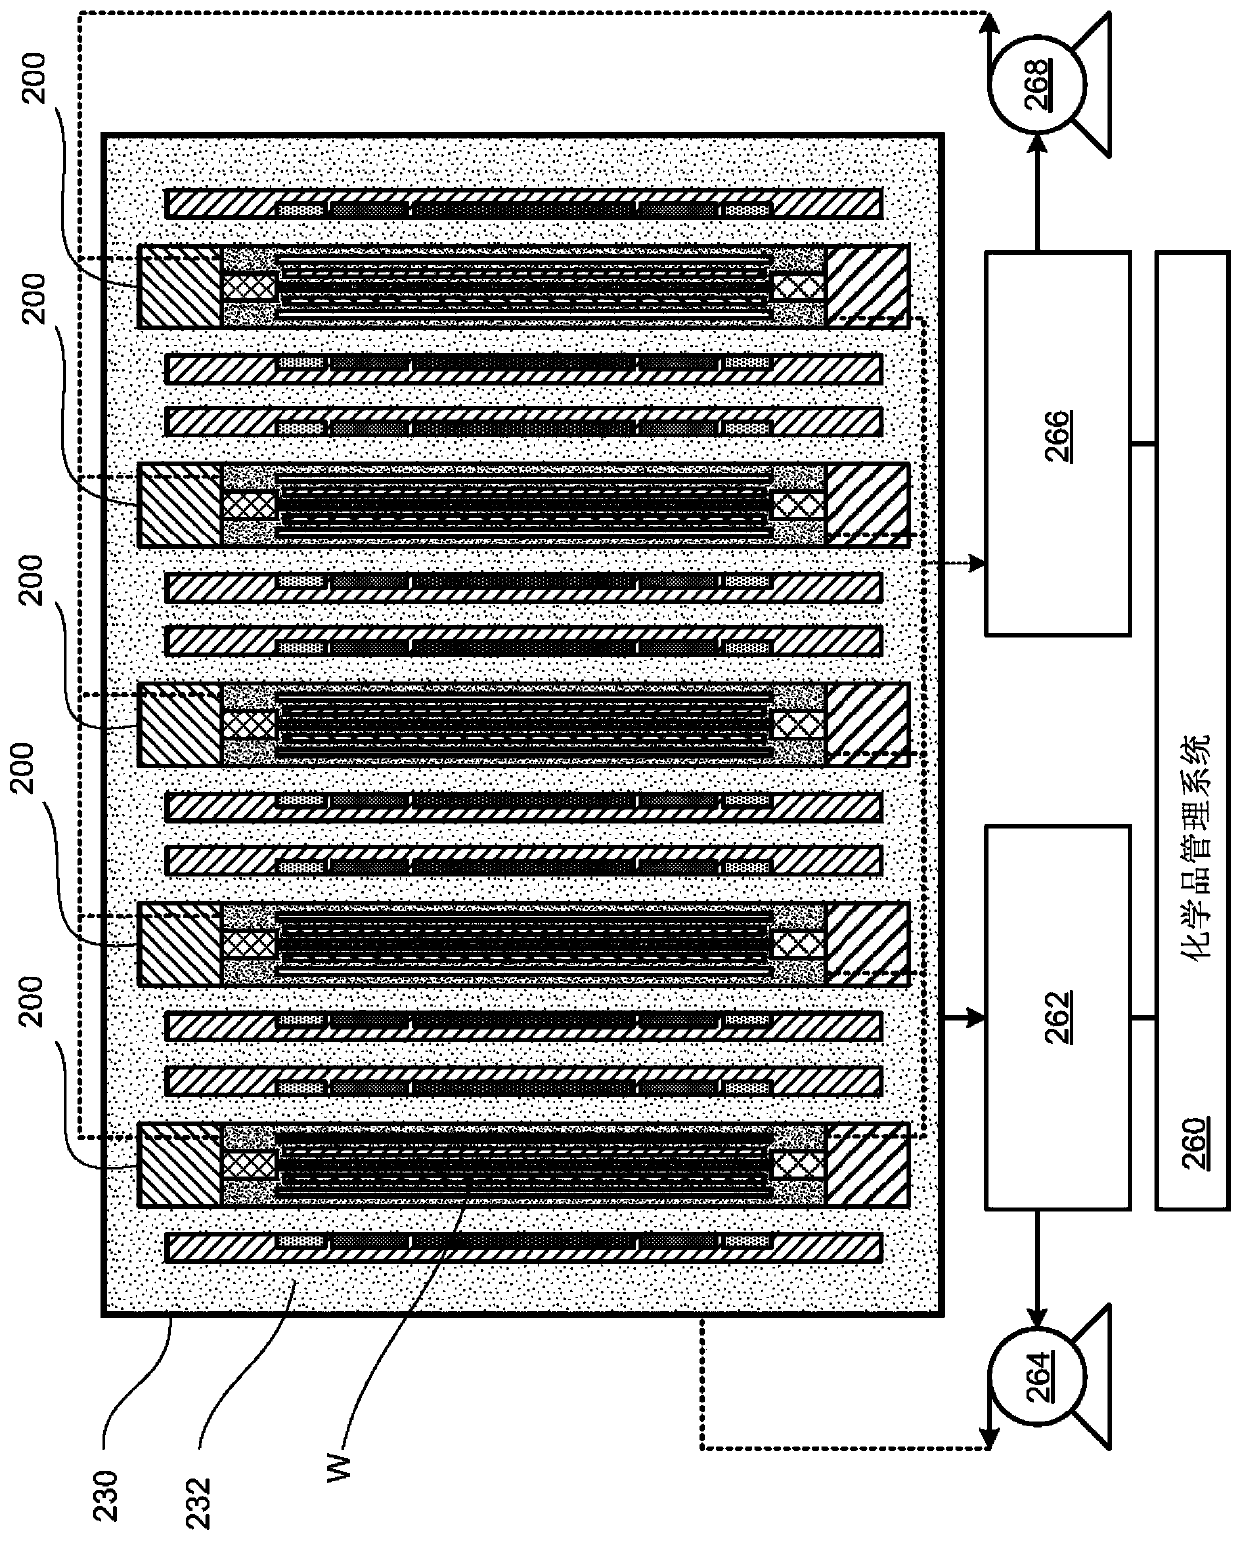 Wet processing system and method of operating